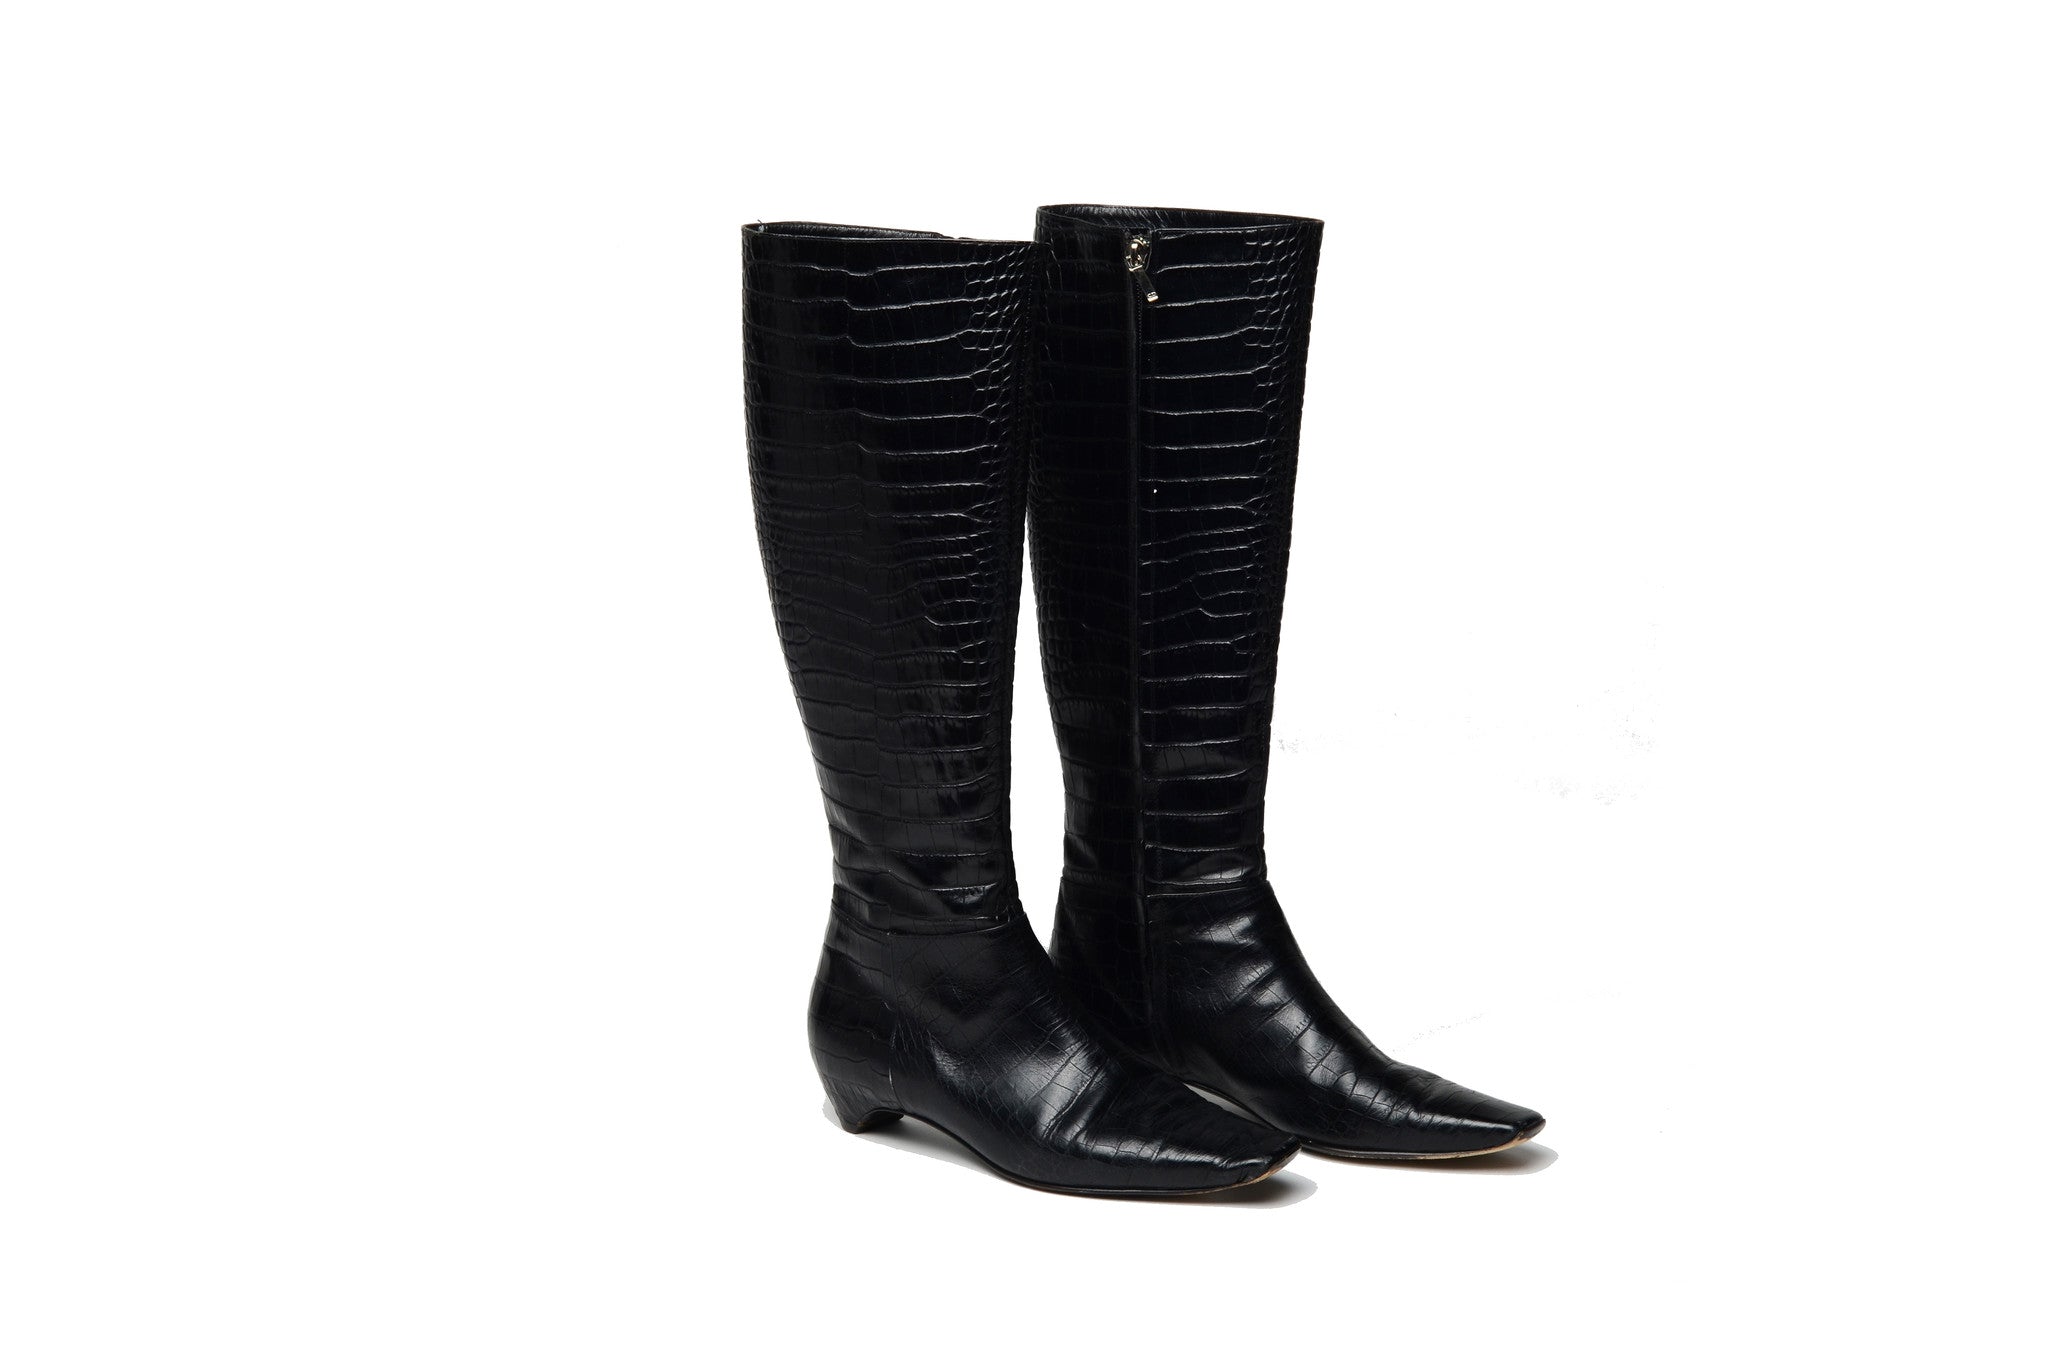 Christian Dior Diorarty High Ballet Boots size 38